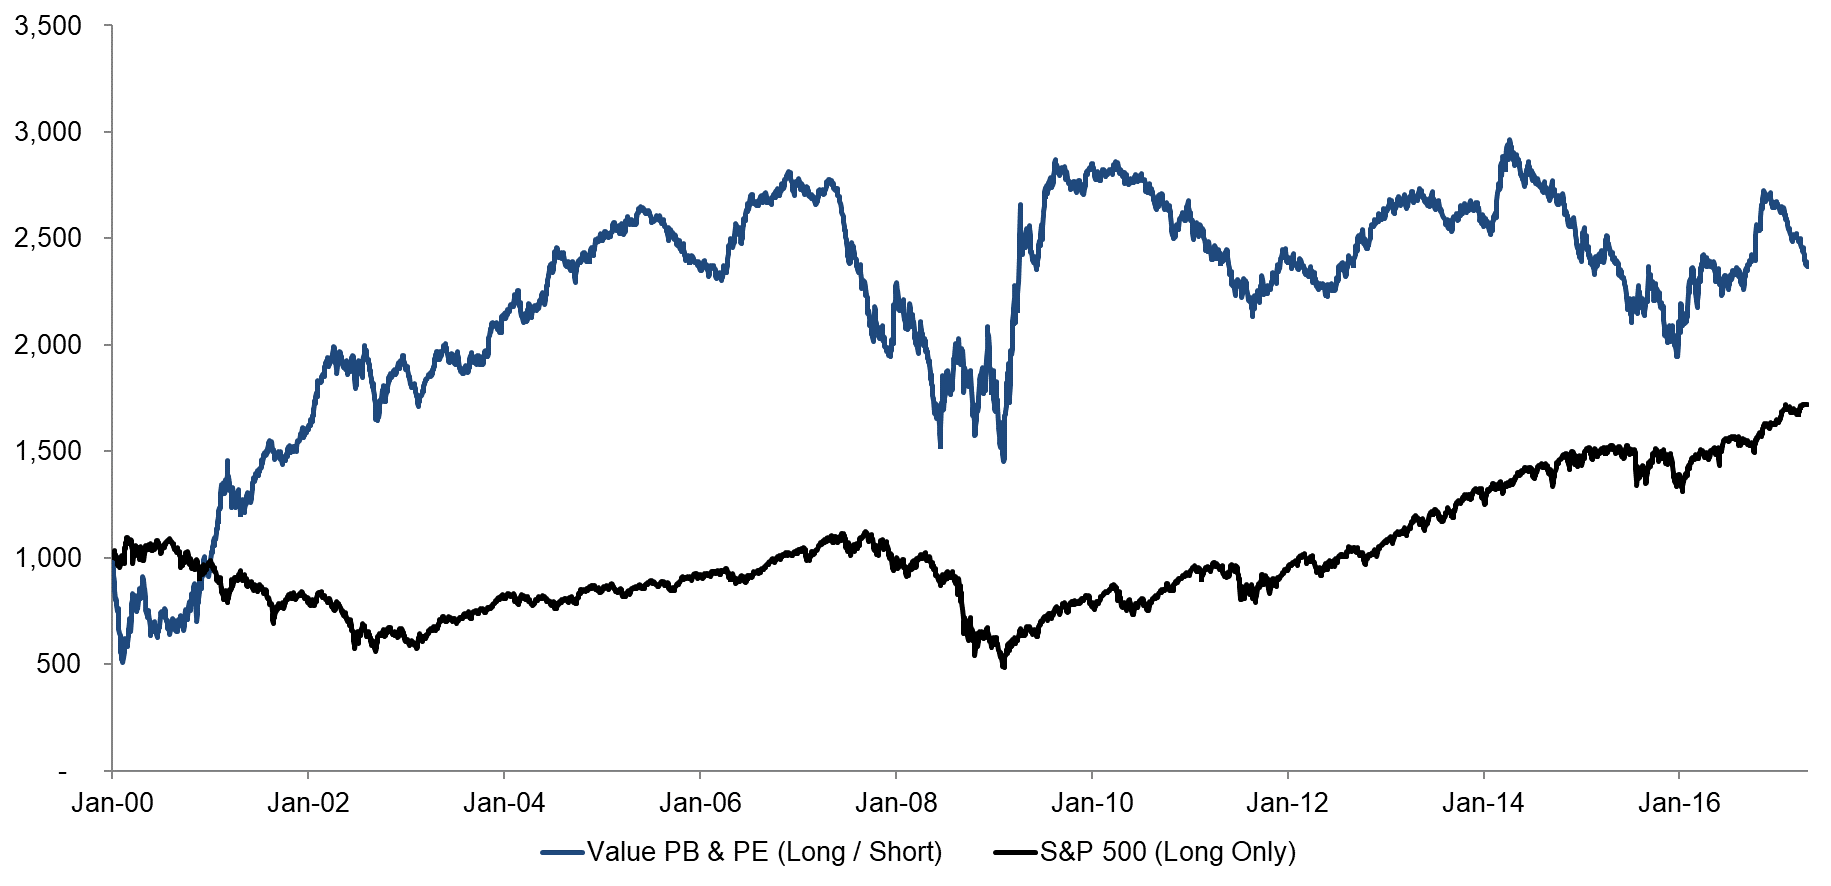 Value US Based on PB & PE Combination and S&P 500